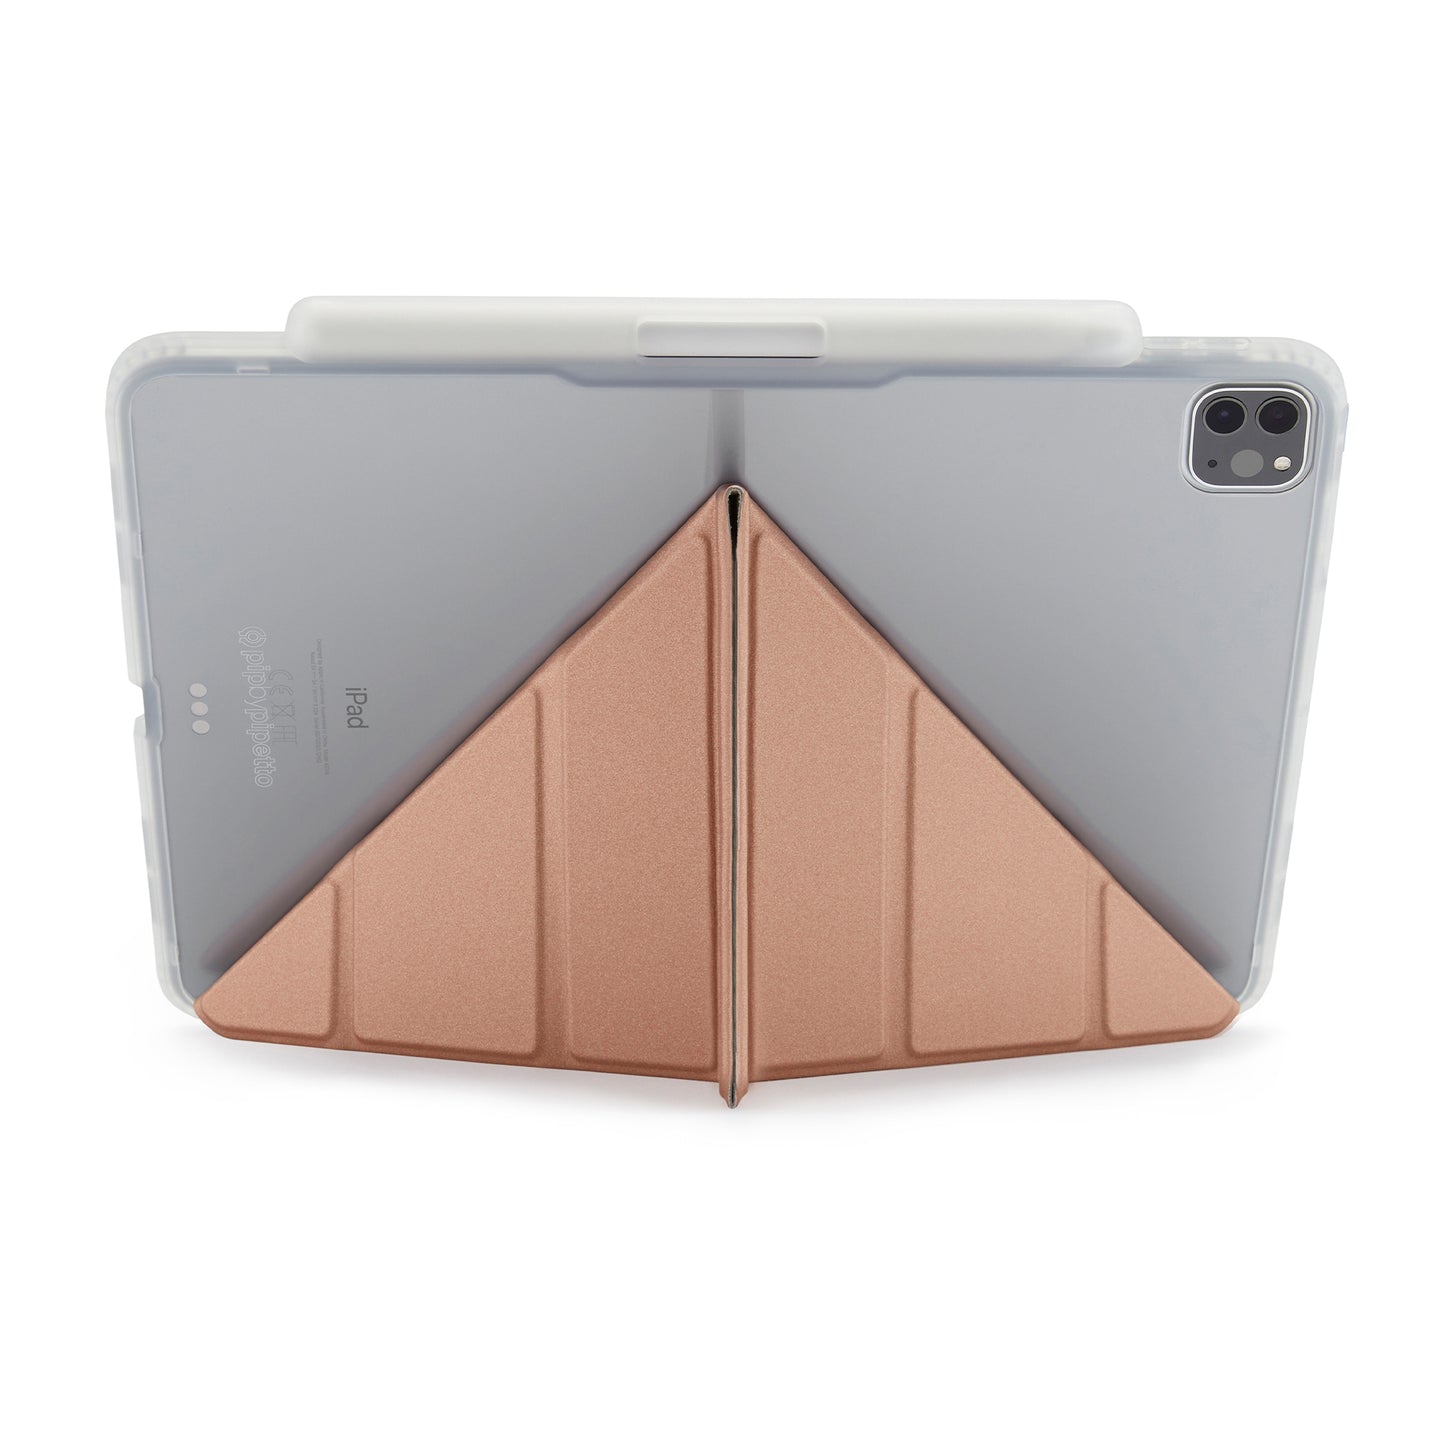 PIPETTO Origami No3 Case for iPad Pro 12.9 3rd-6th Gen (2018-2022) - Rose Gold